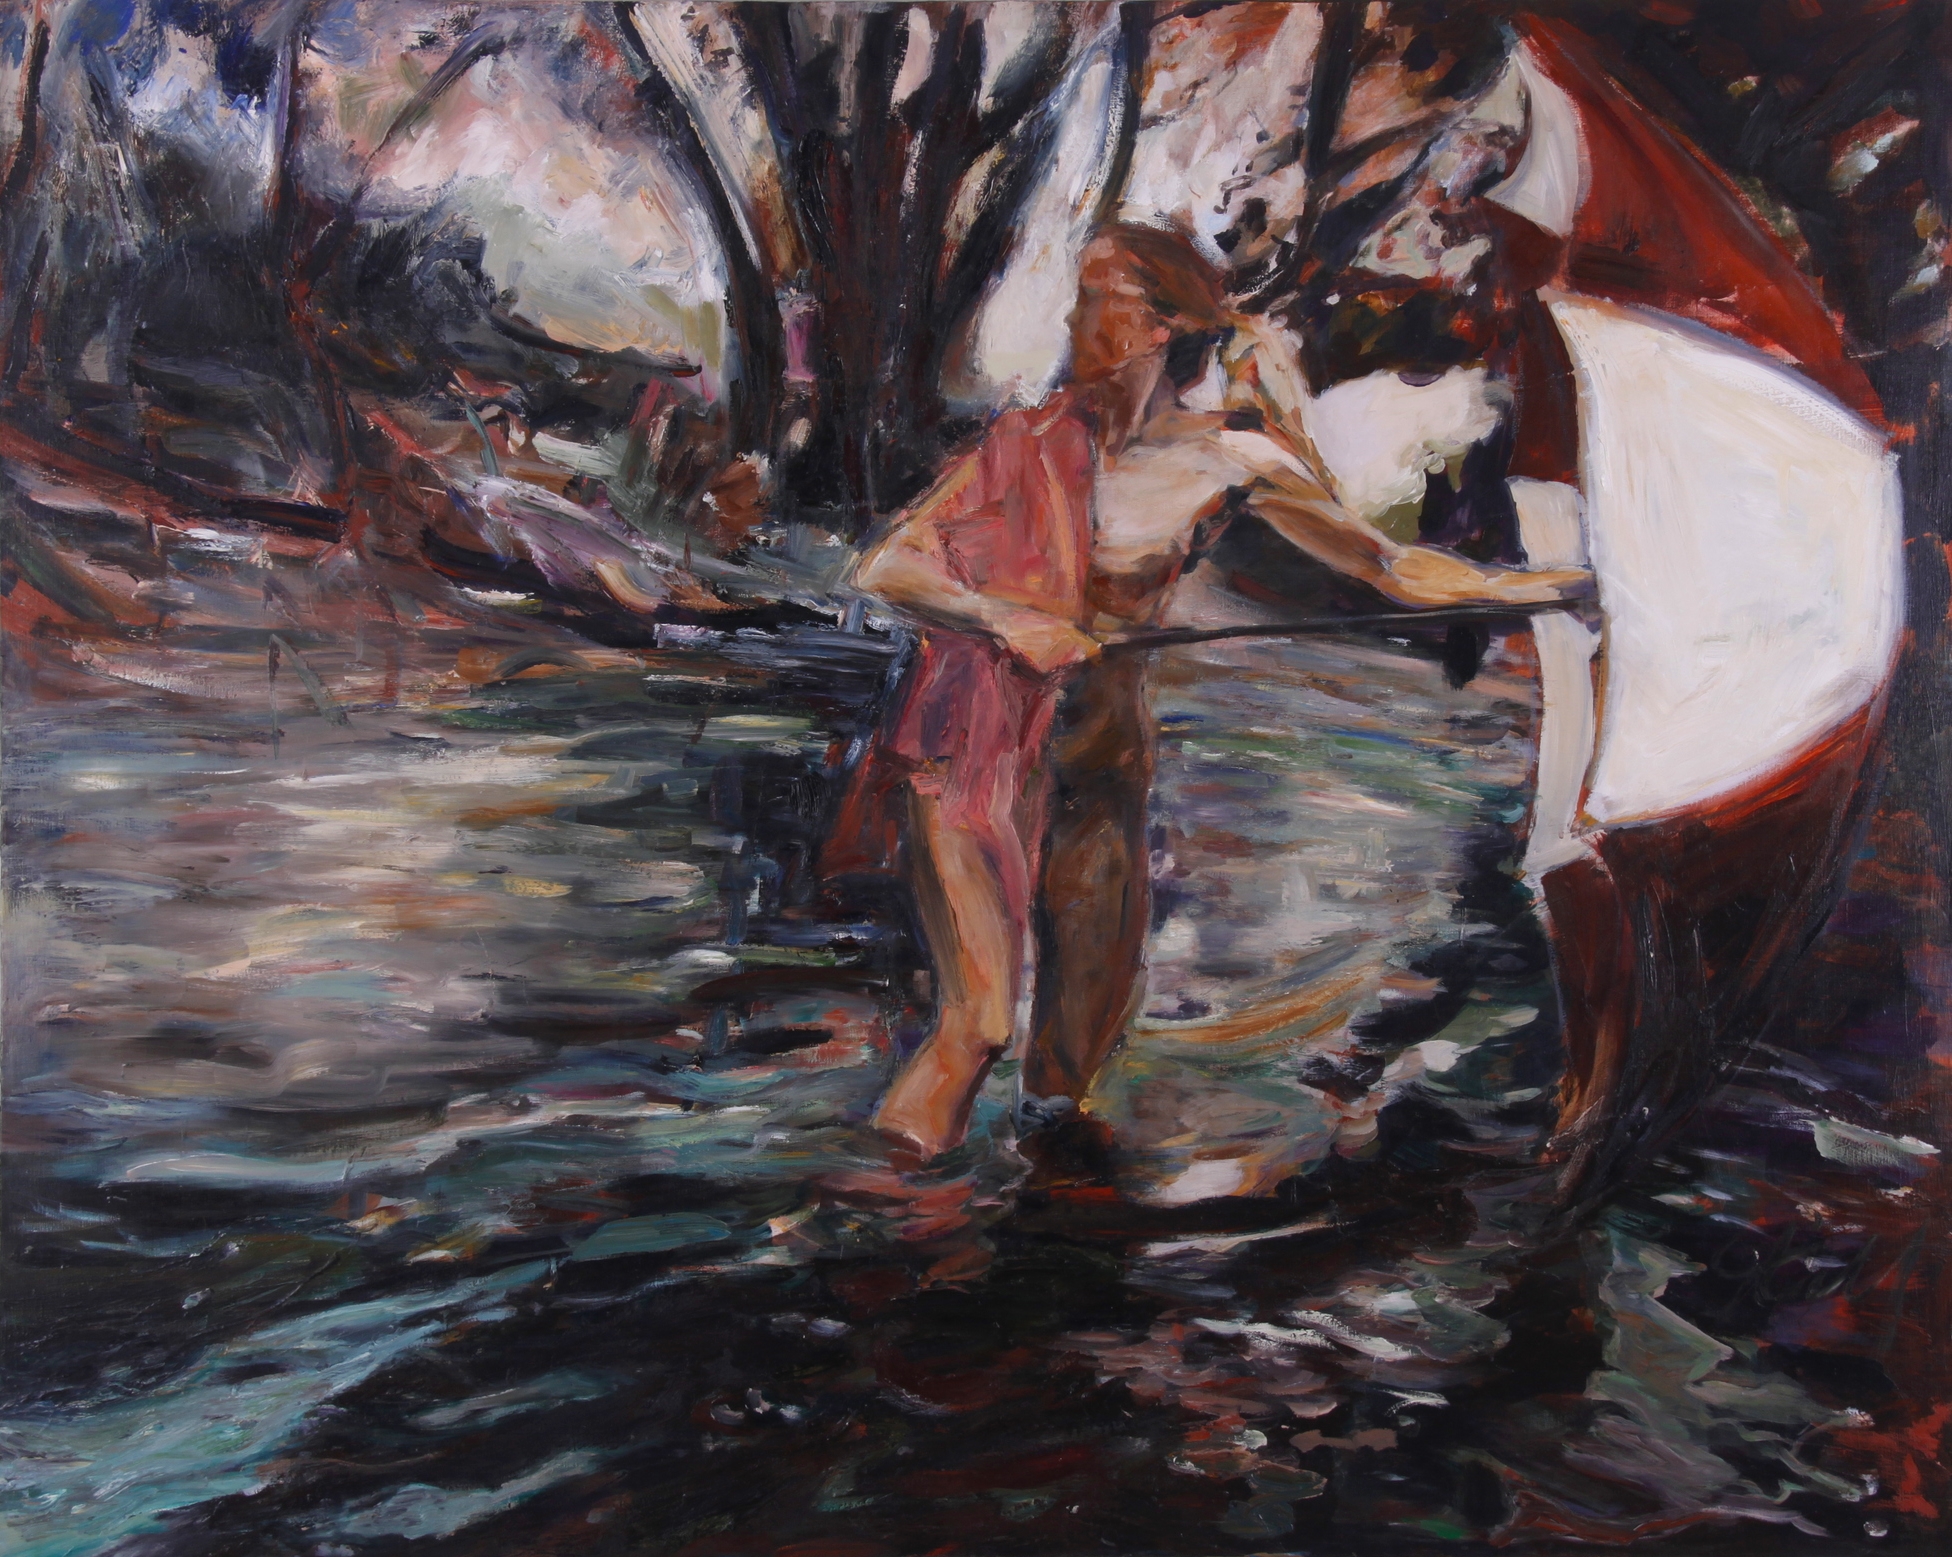 In The Wind, 1994, oil on canvas, 48" x 60".